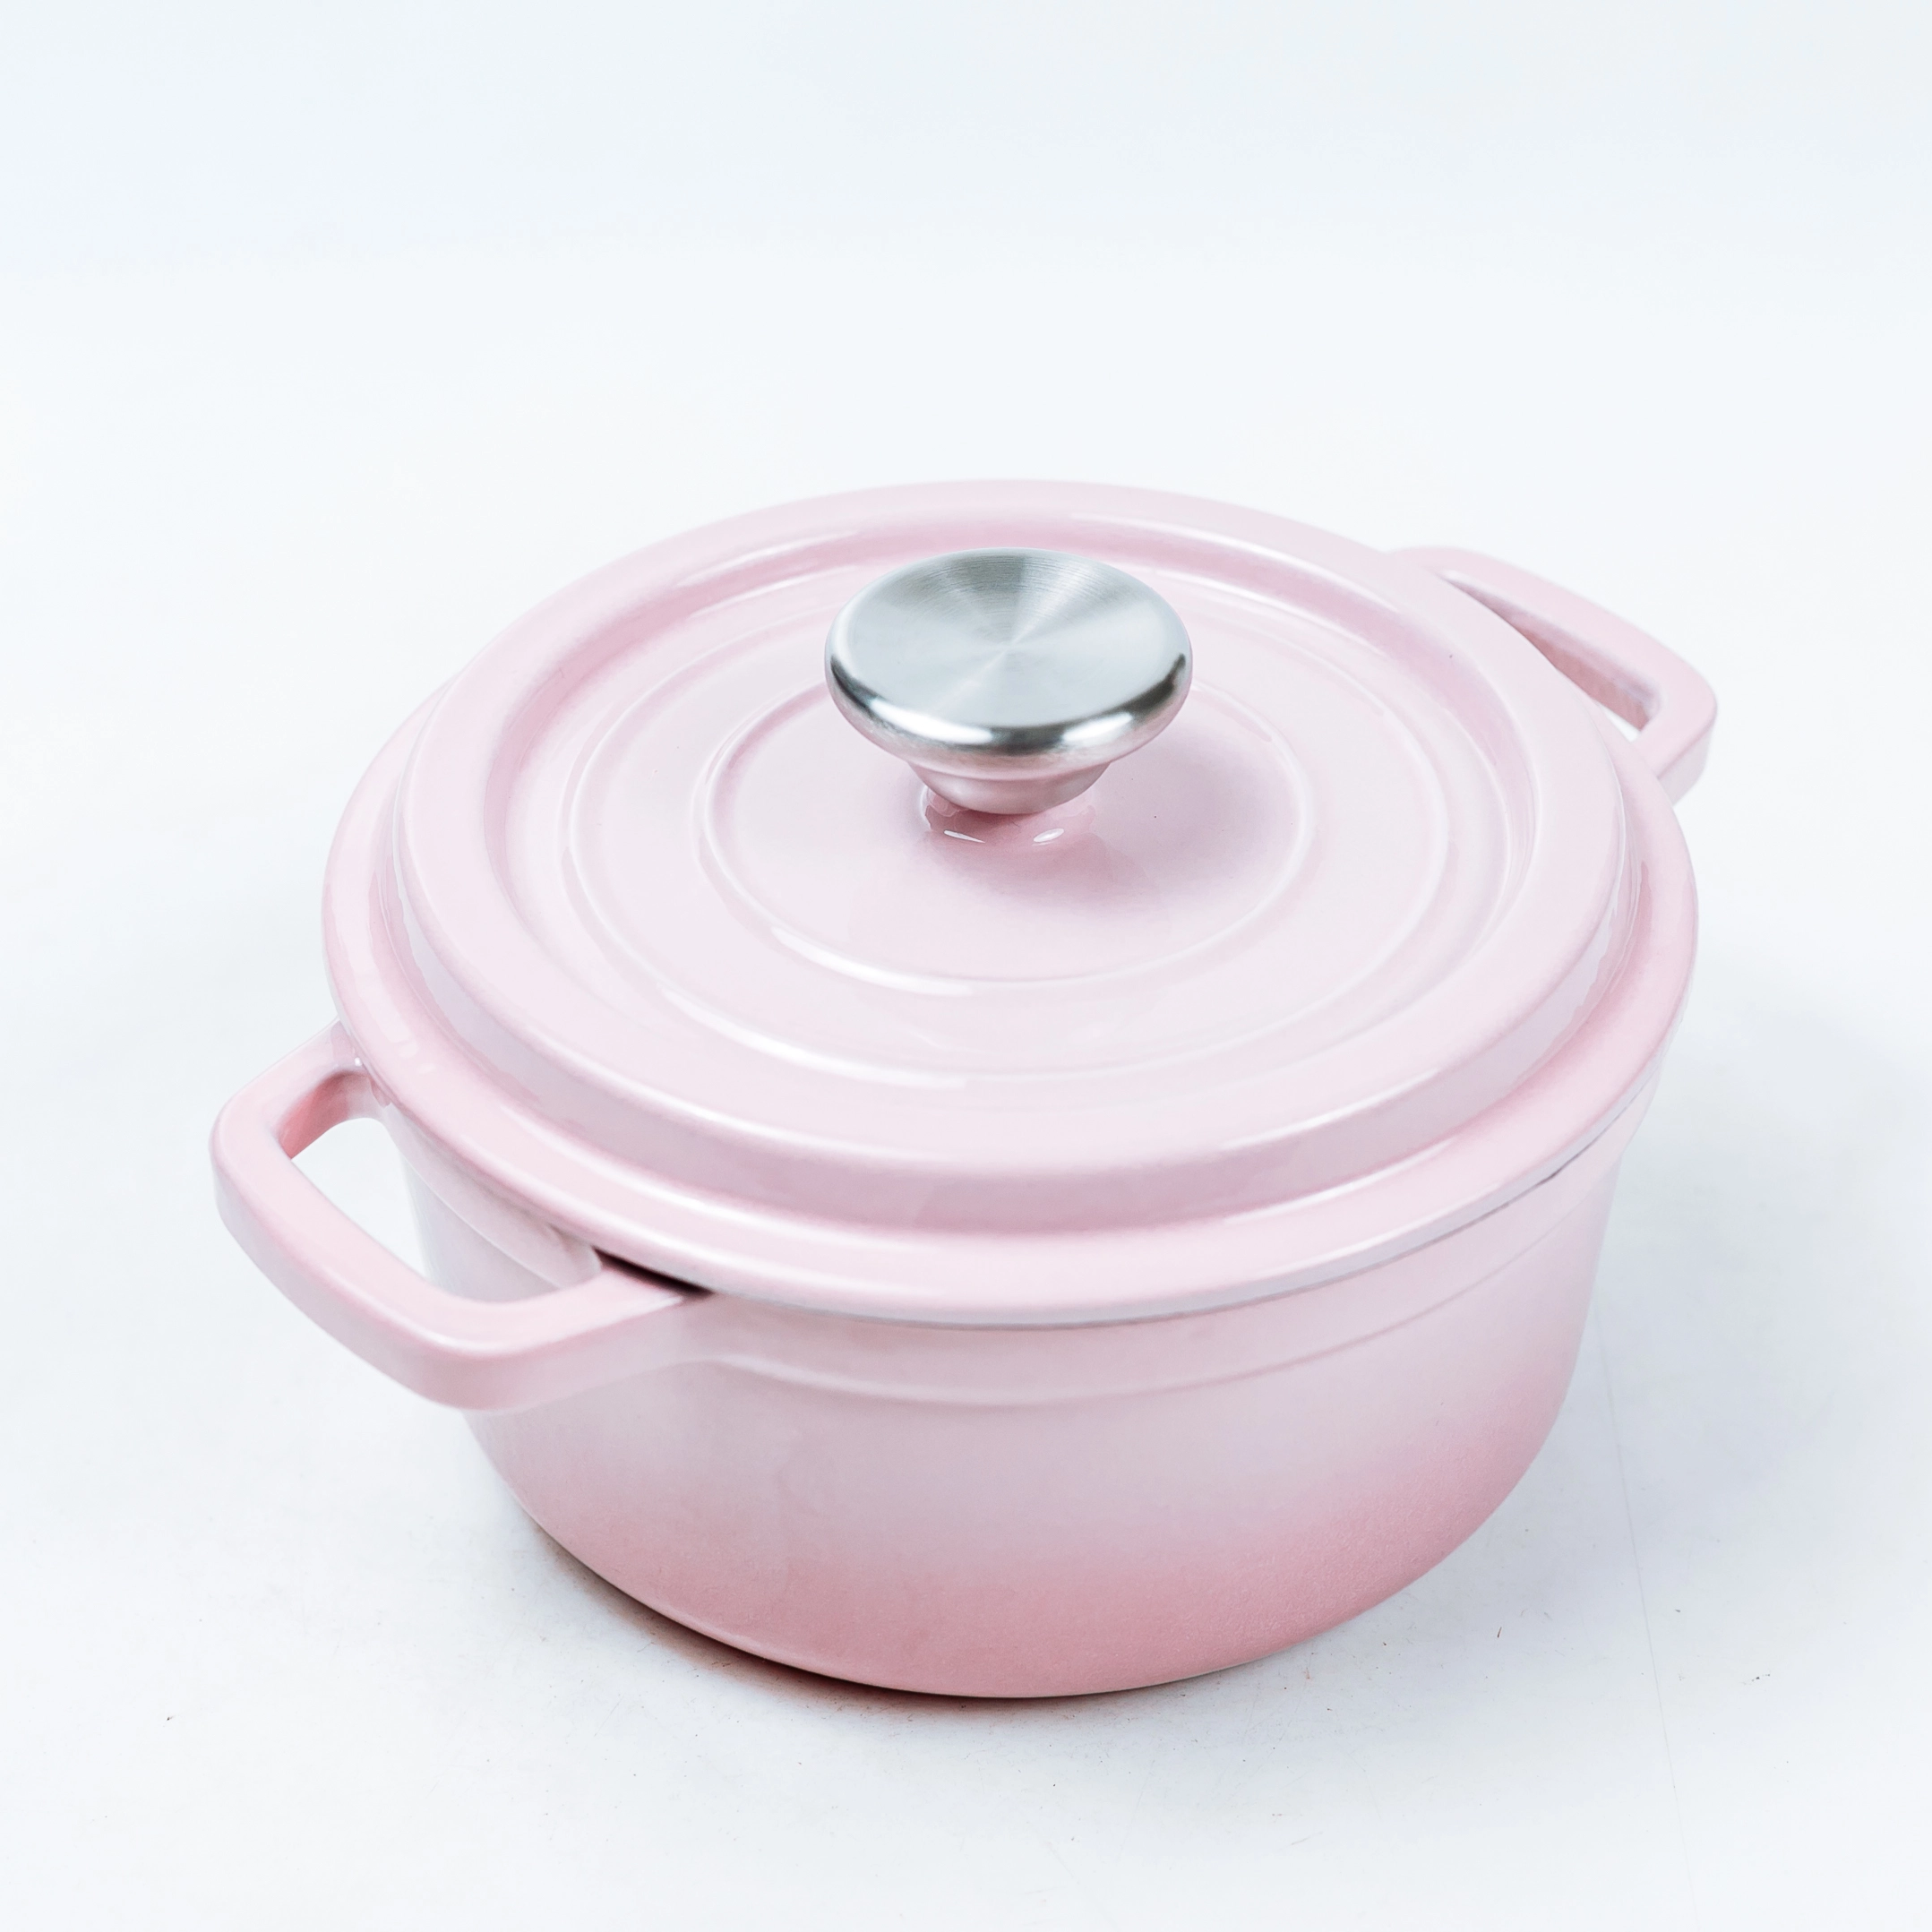 Enameled Cast Iron Round Casseroles with Lid